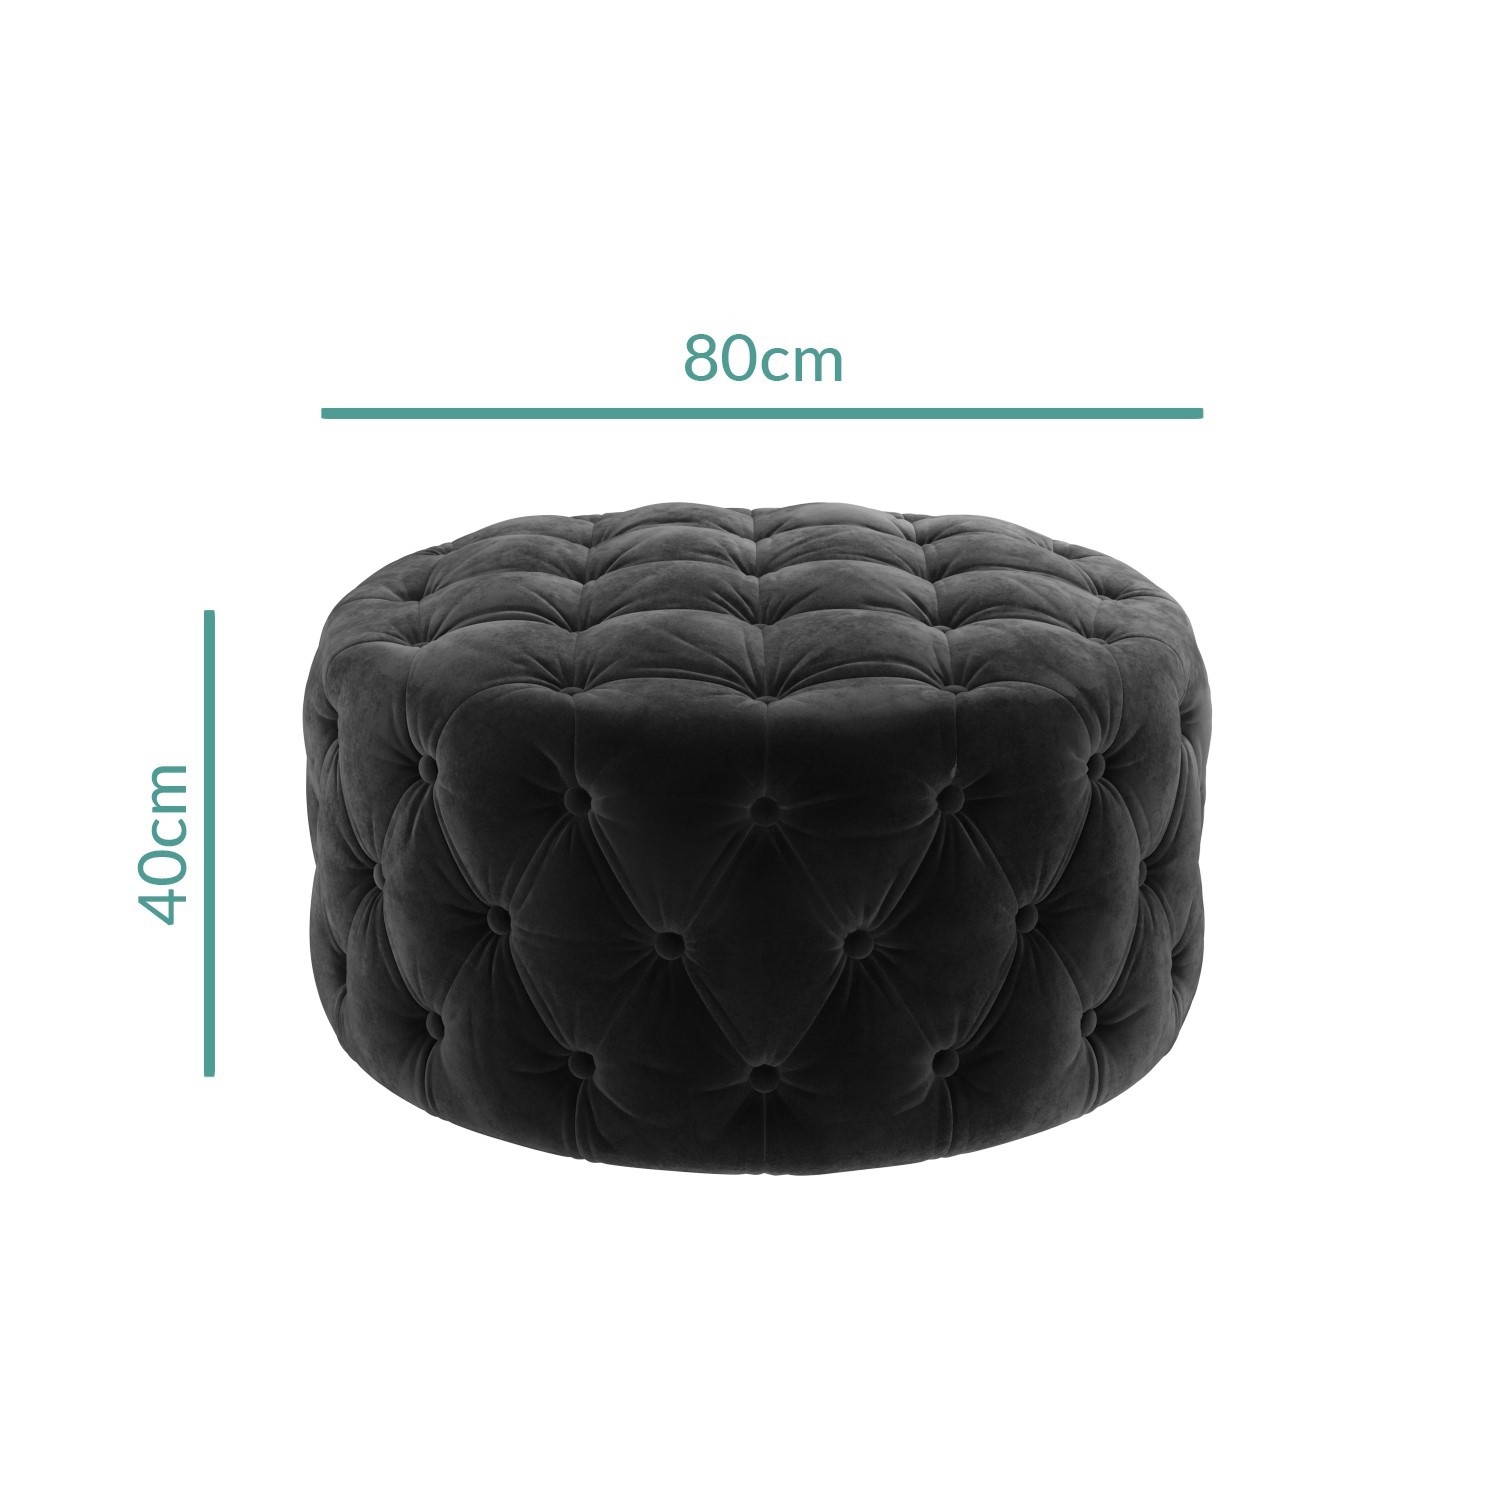 Read more about Large dark grey velvet chesterfield pouffe stool xena